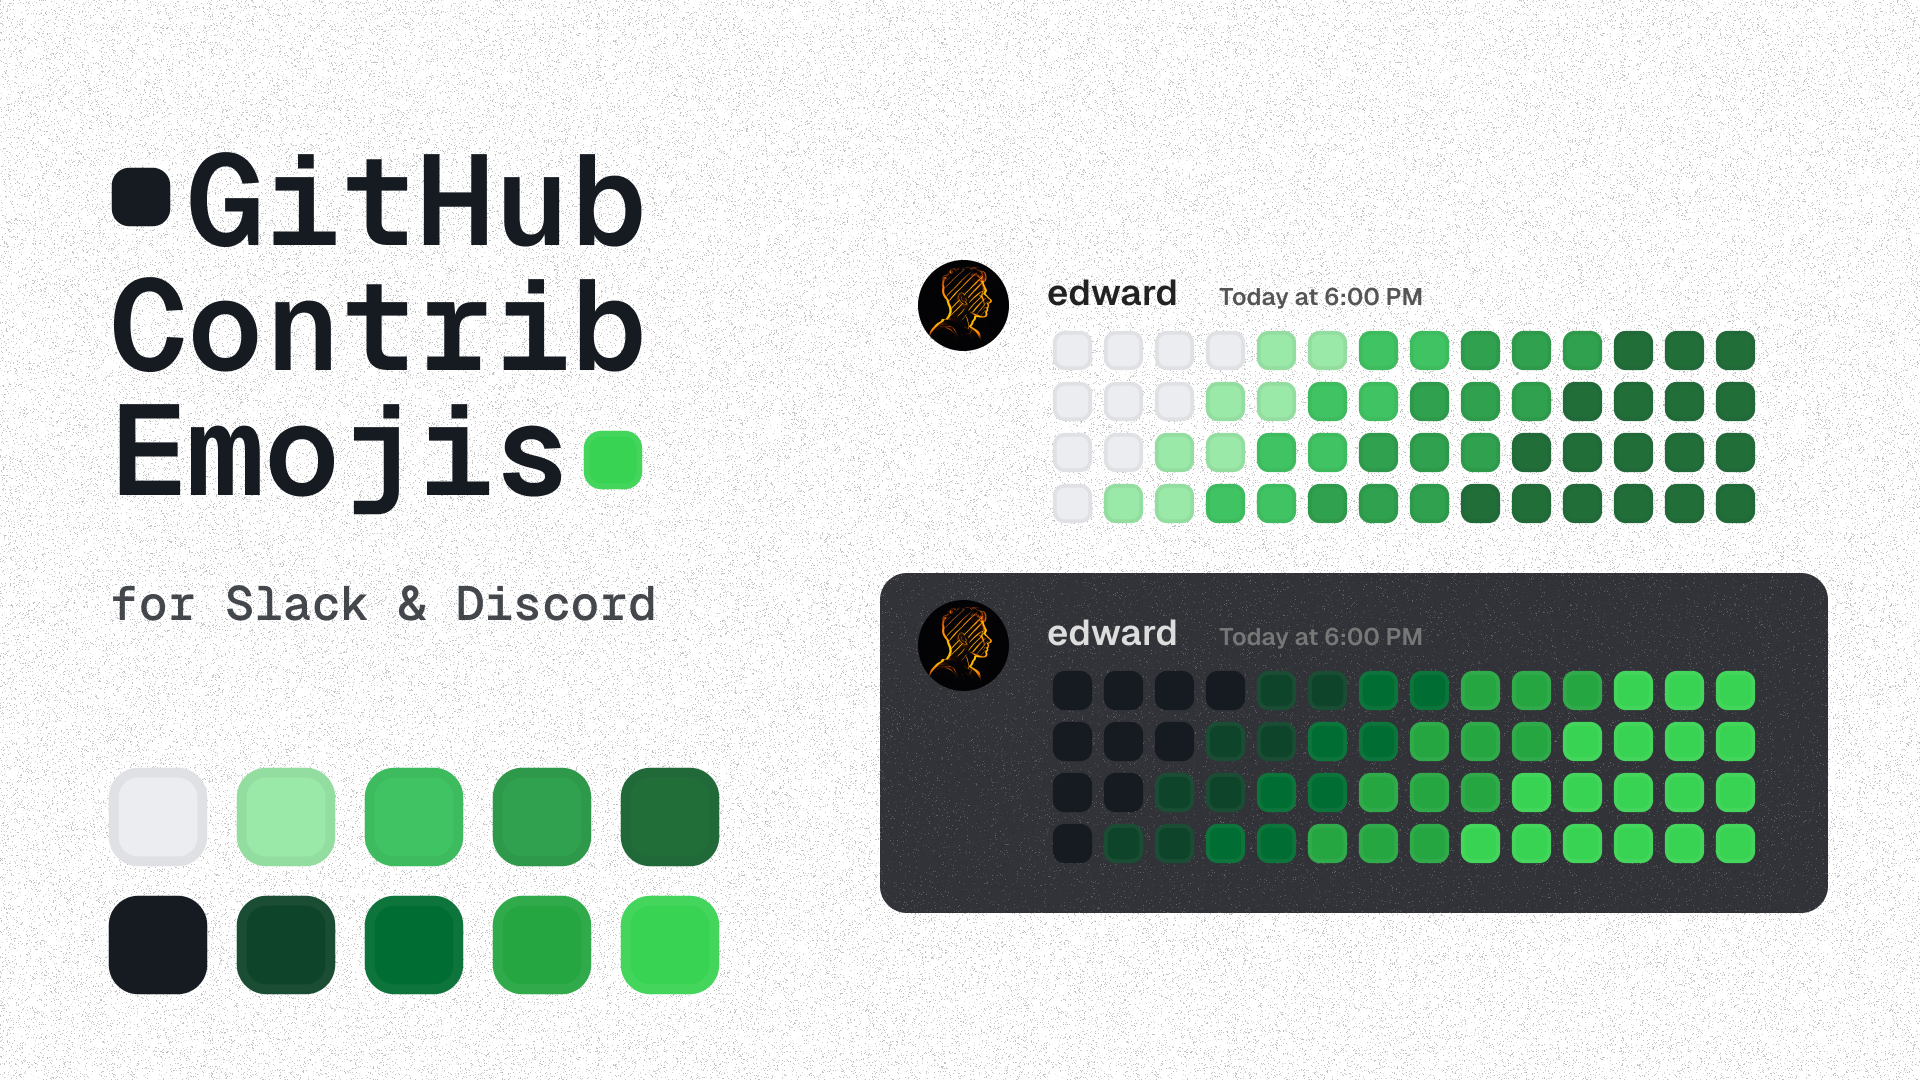 A banner of the GitHub Contrib Emojis, showing all 10 emojis in the set